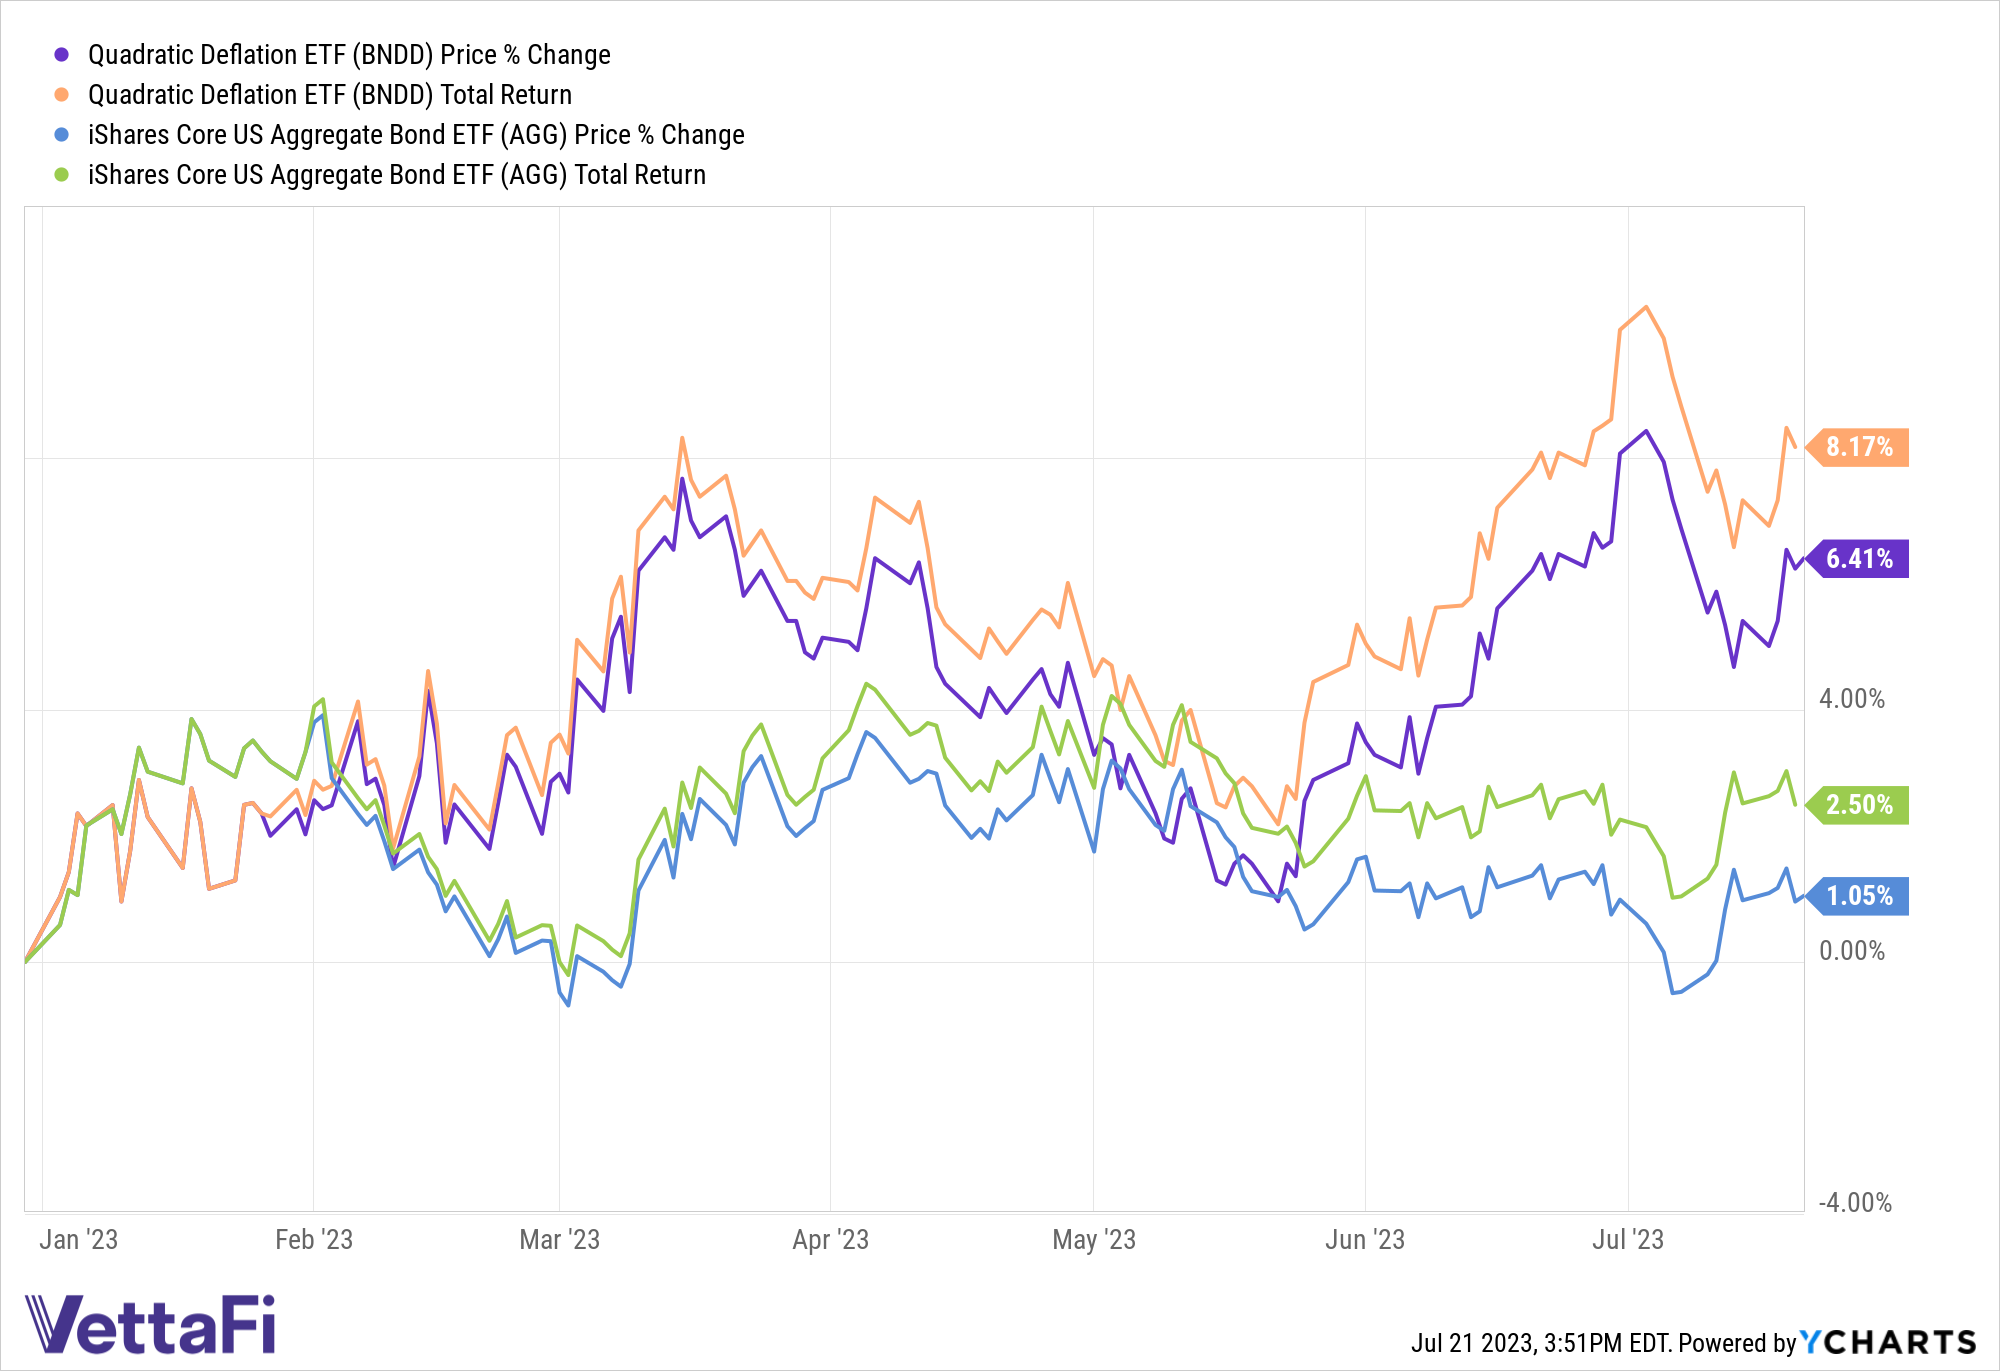 Price and total return chart for BNDD and AGG YTD, showcasing BNDD's outperformance within the U.S. bond market this year.